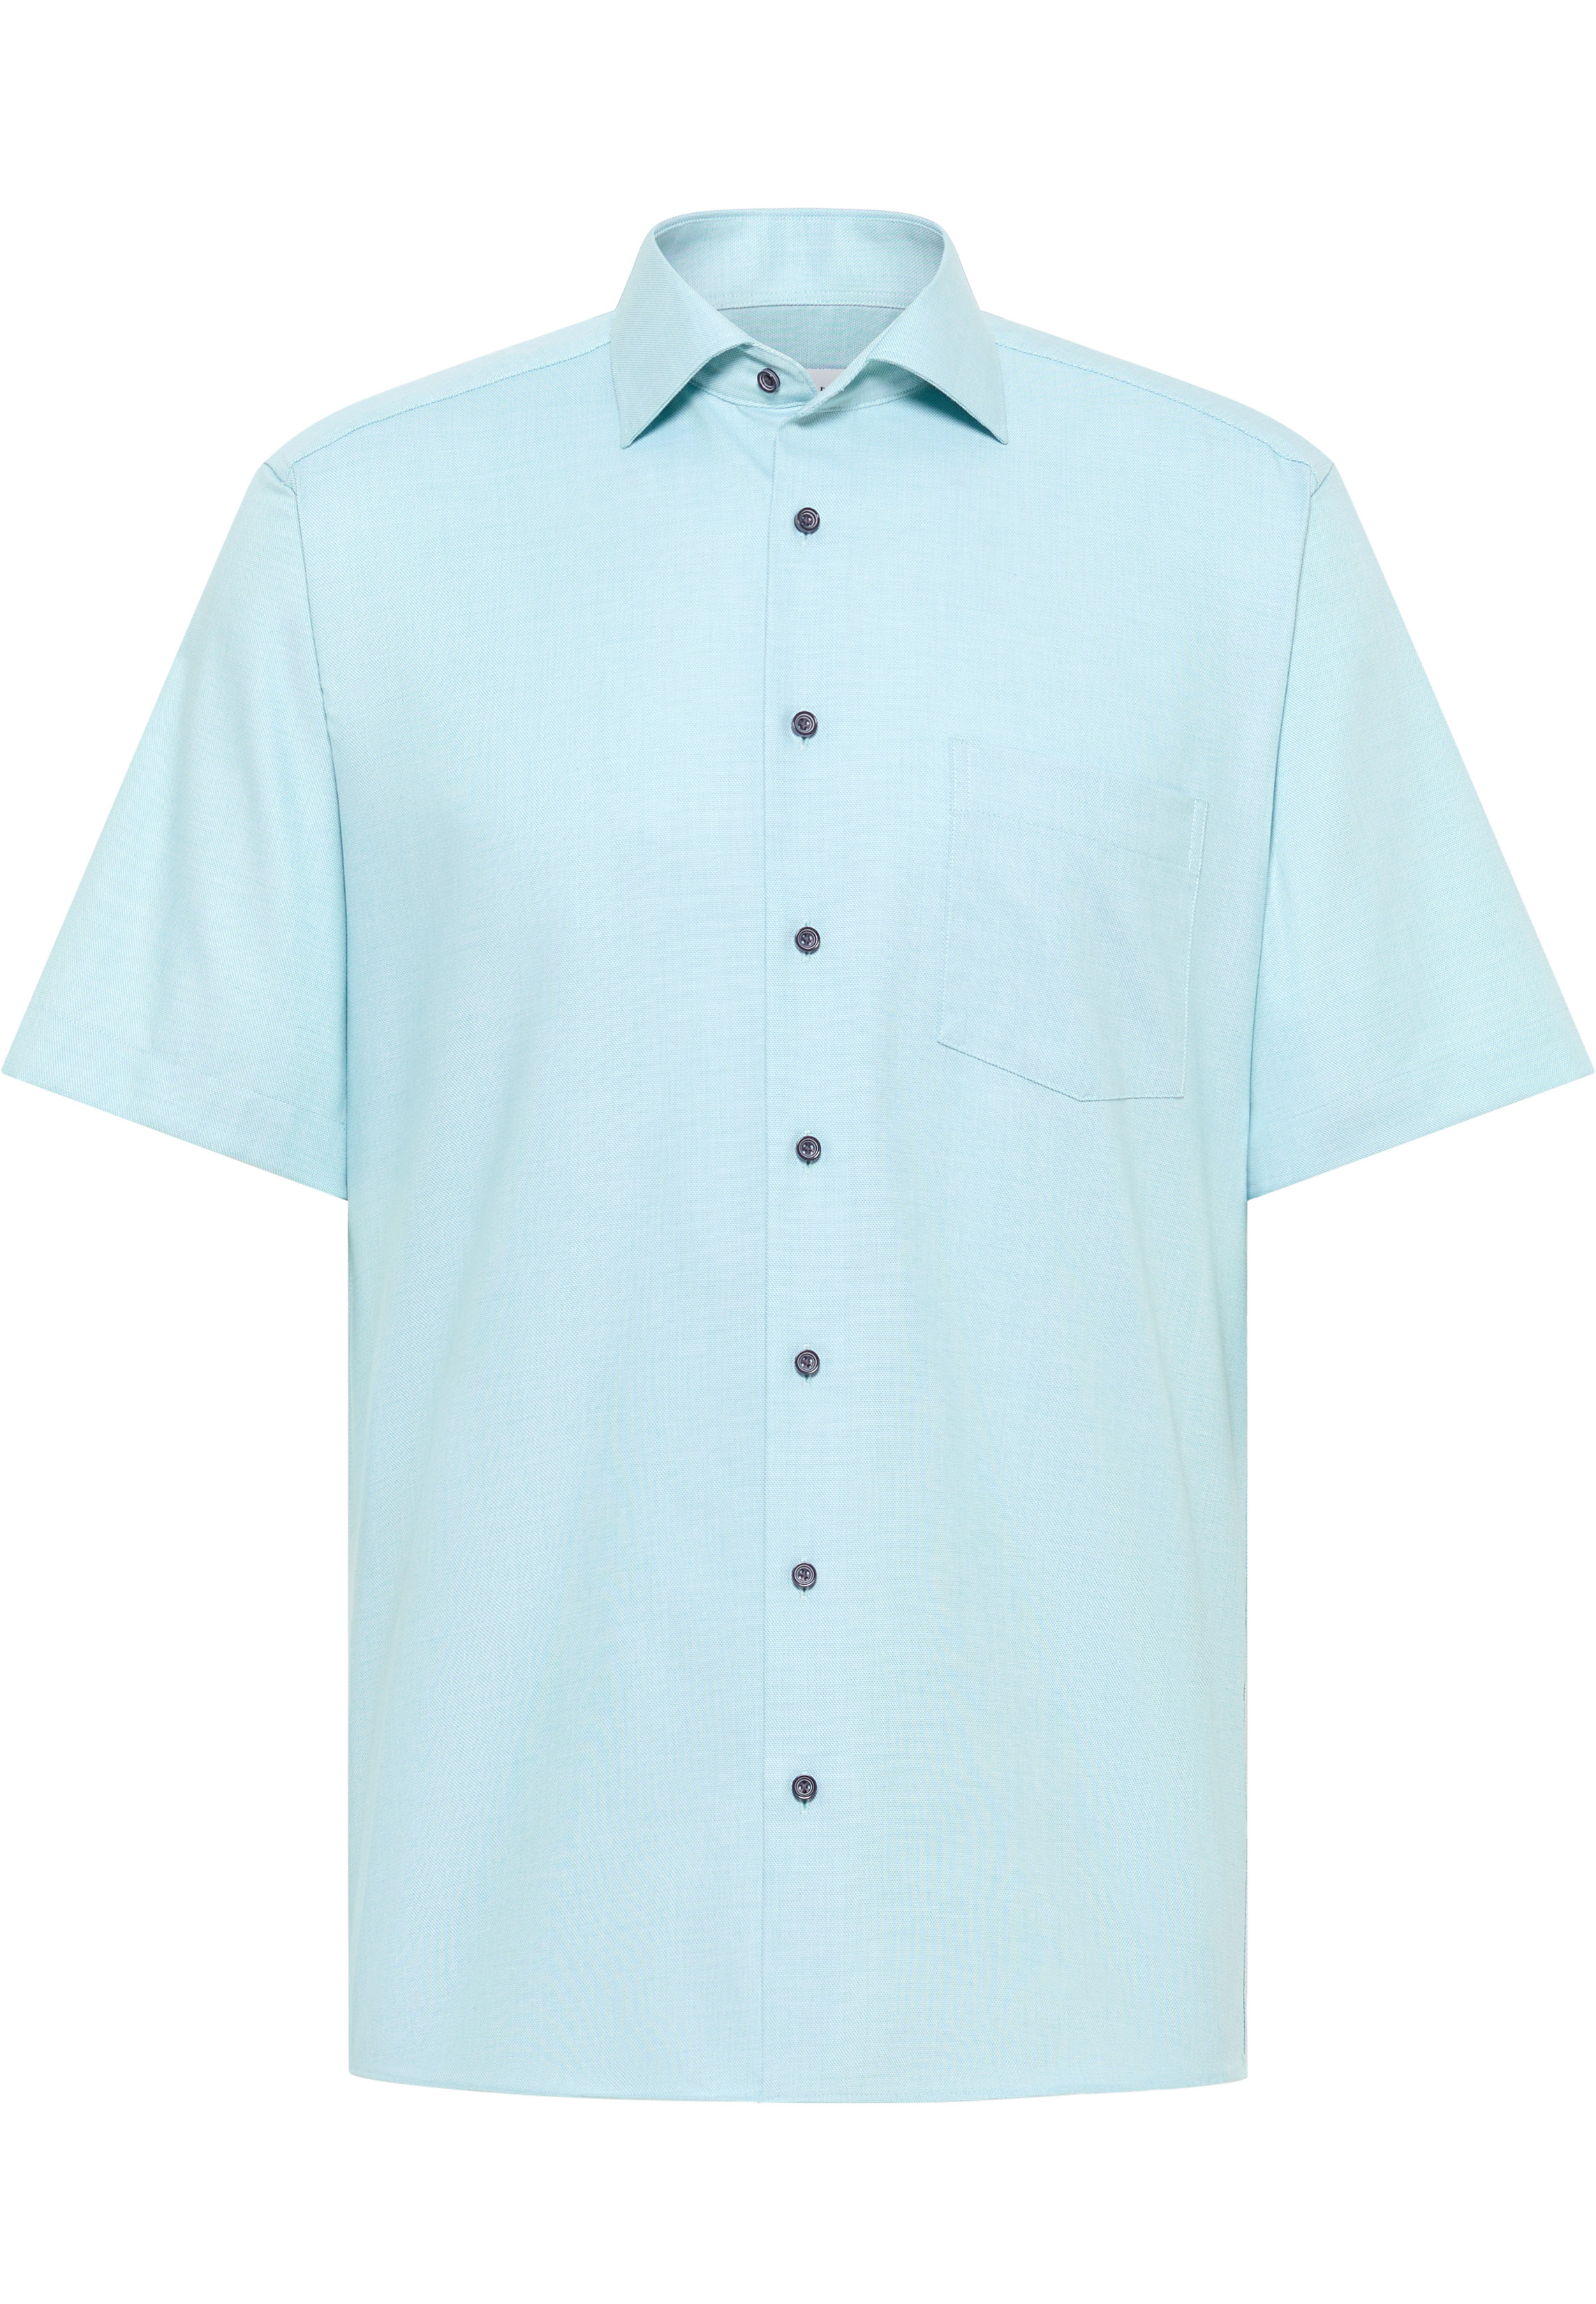 MODERN FIT Shirt in mint structured